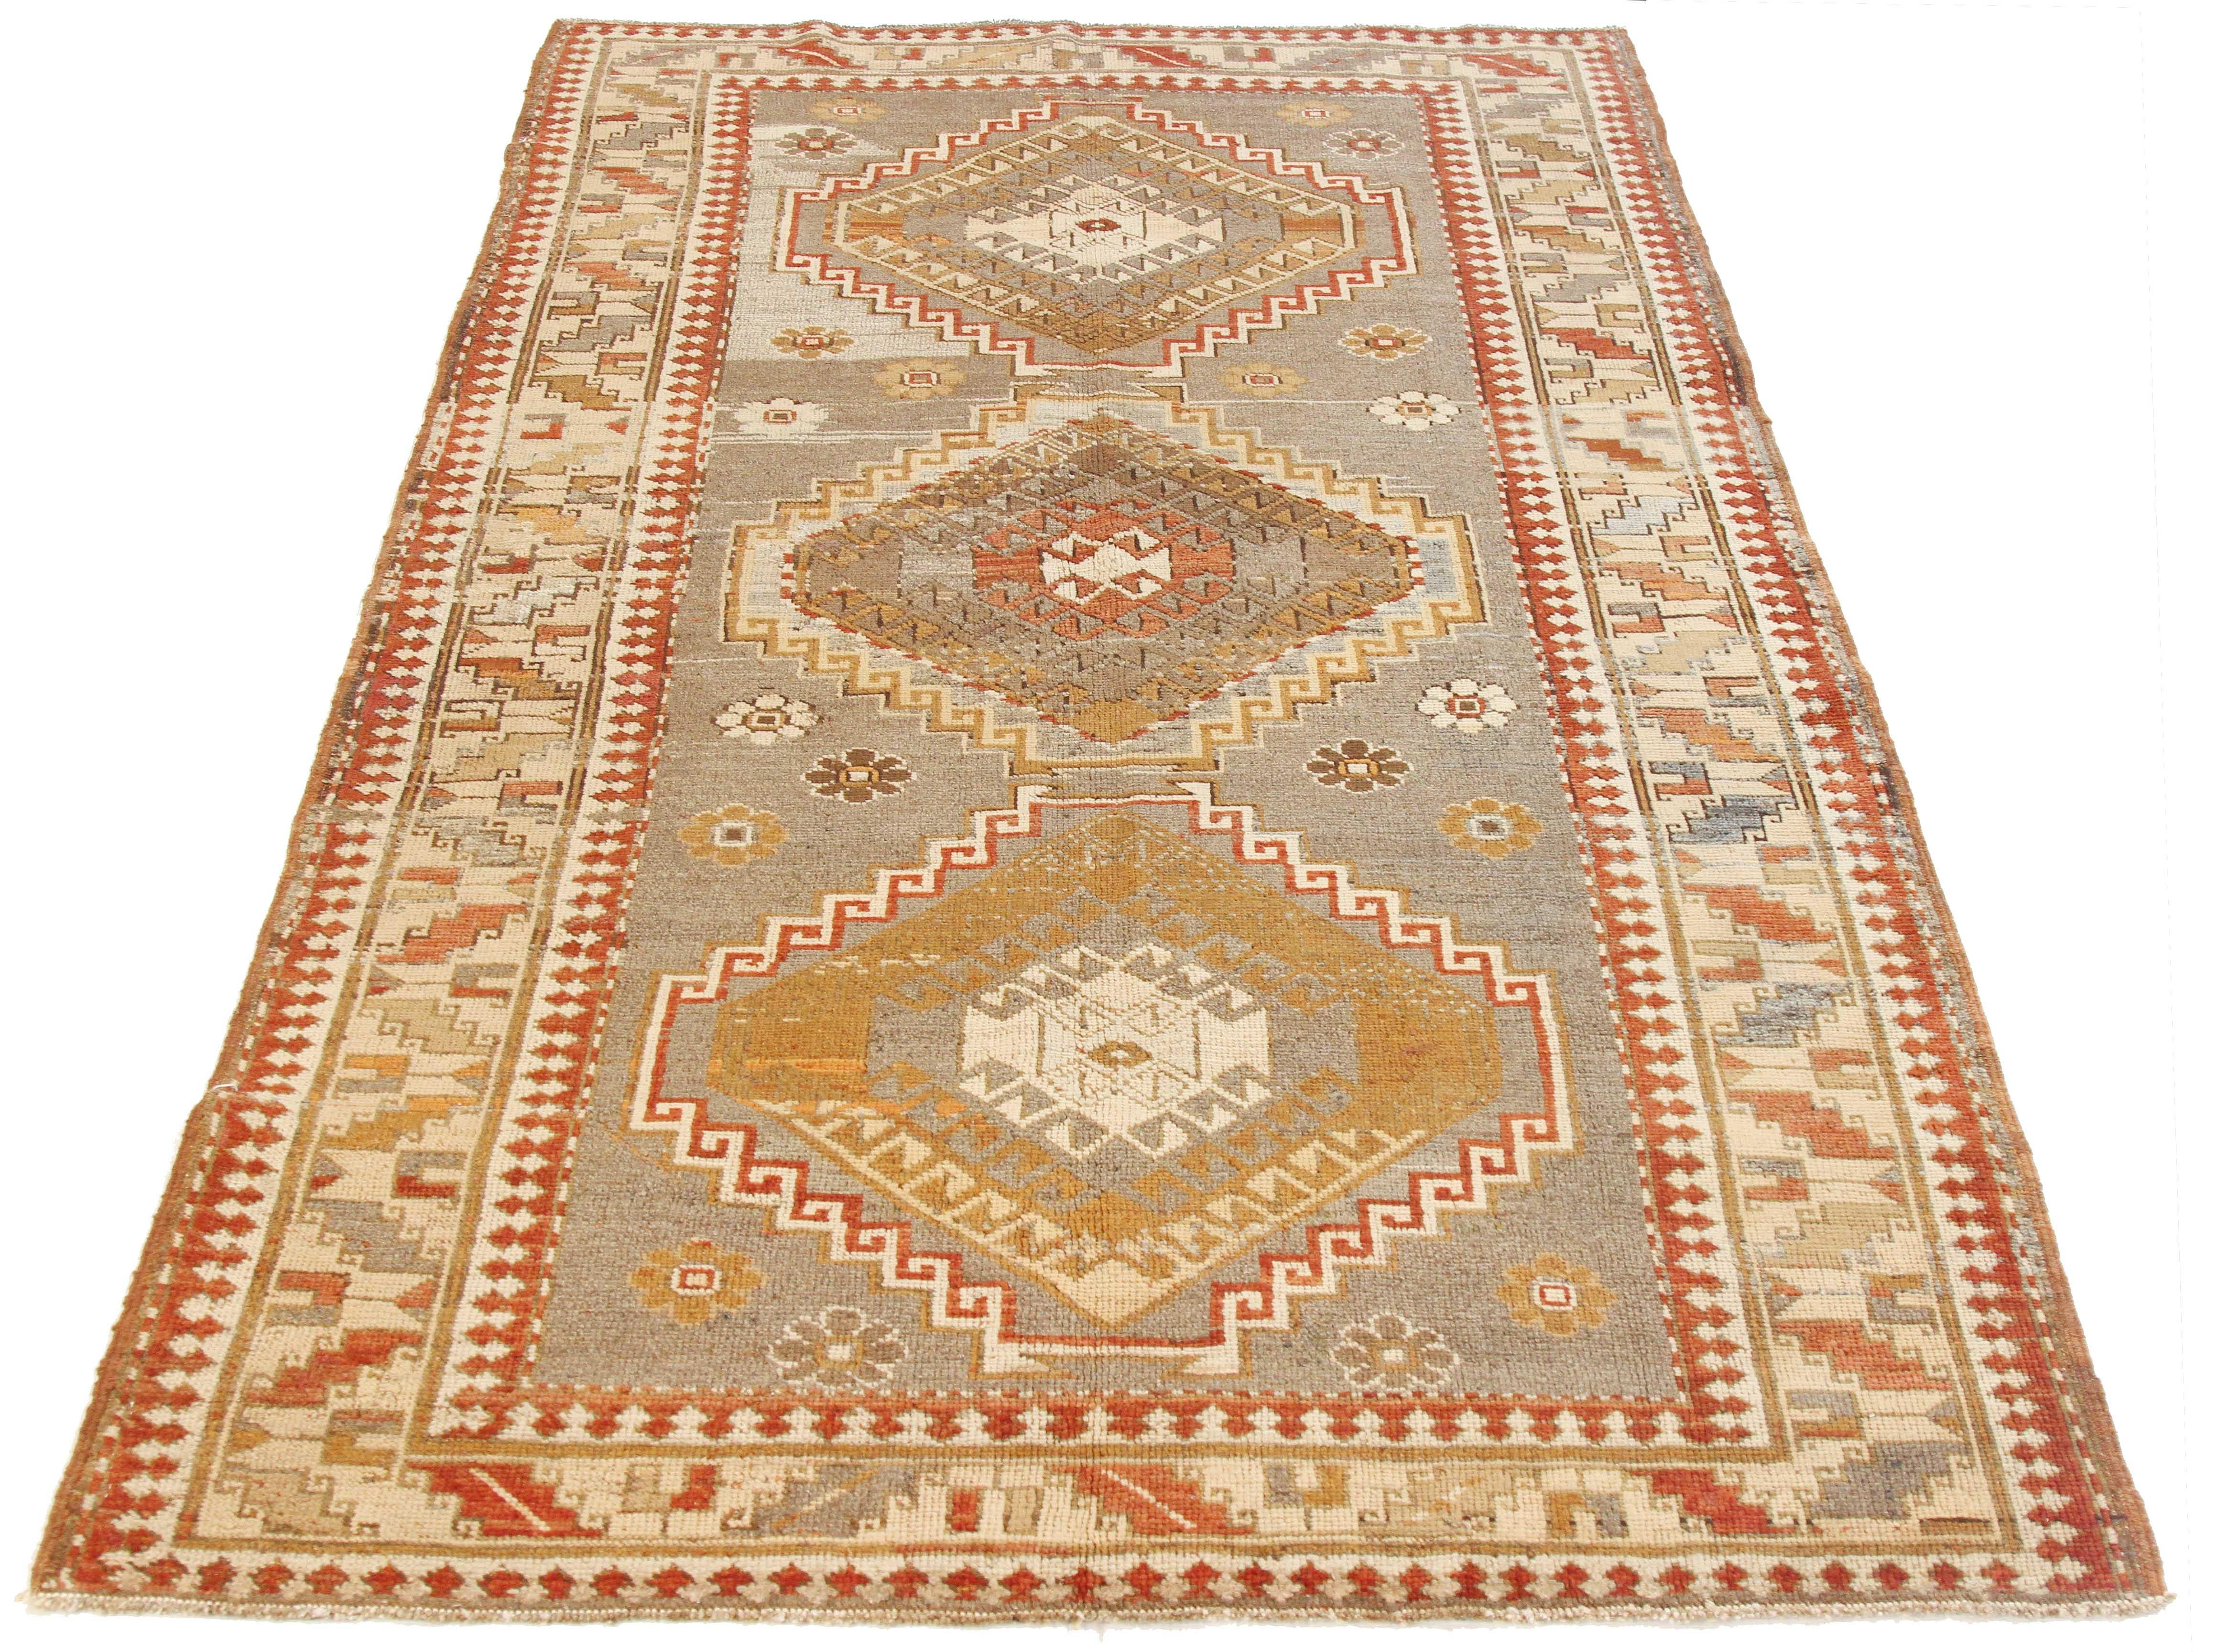 Antique Persian rug handwoven from the finest sheep’s wool and colored with all-natural vegetable dyes that are safe for humans and pets. It’s a traditional Kazak design featuring tribal medallion details in brown and red over an ivory field. It’s a